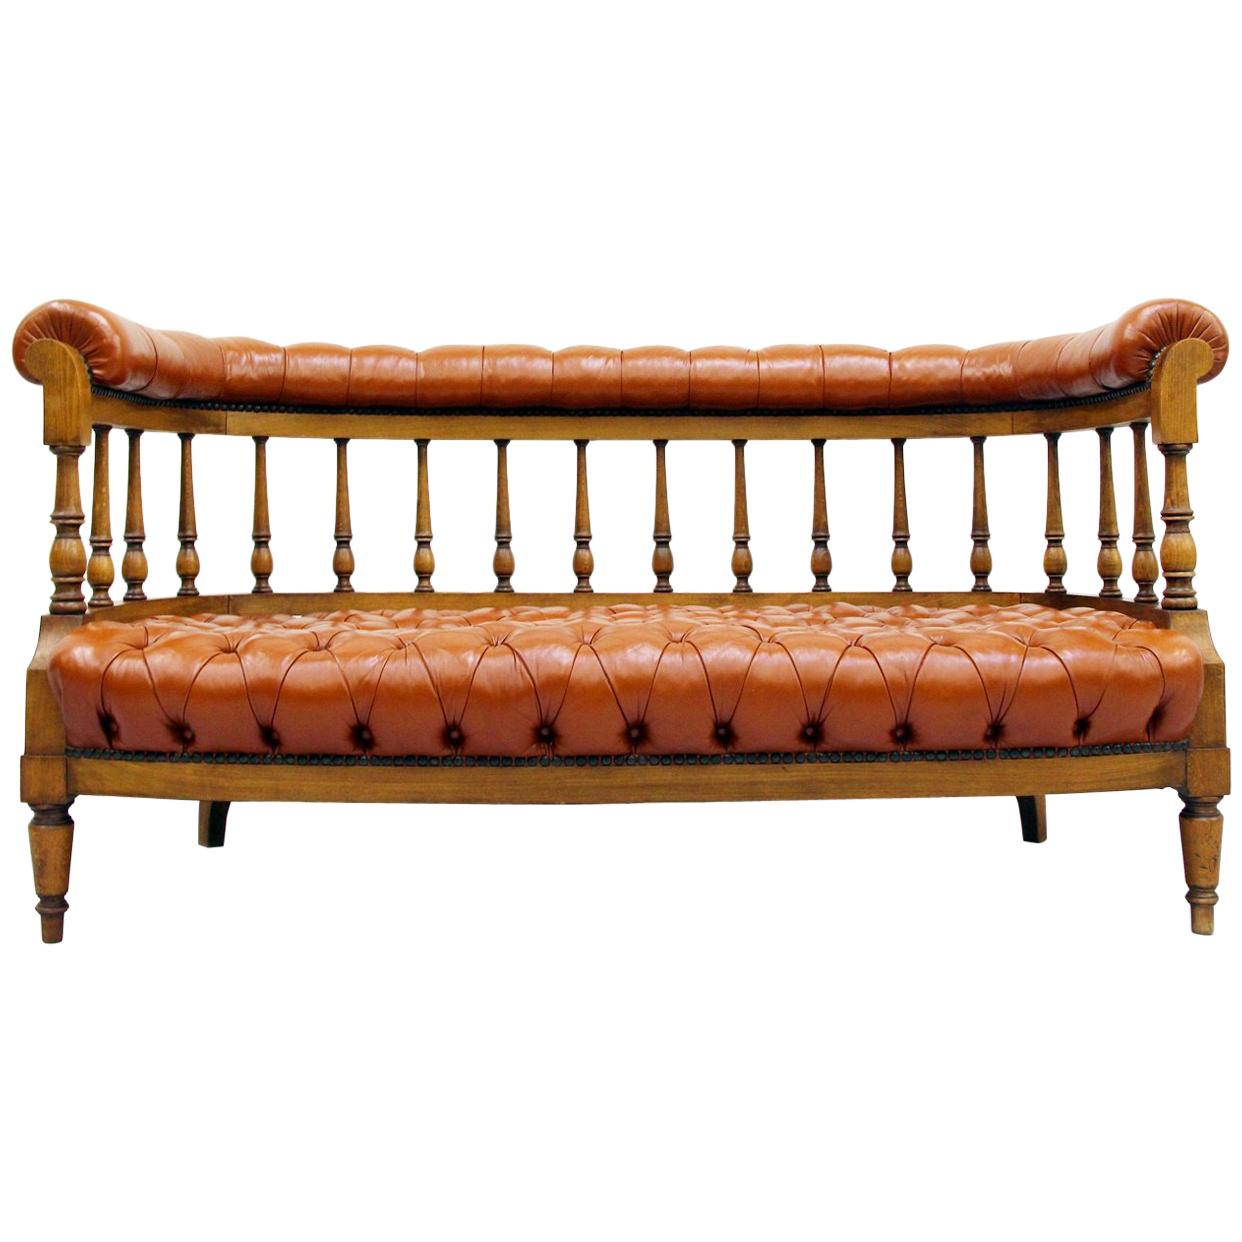 Chesterfield Vintage Chippendale English Sofa Leather Antique Couch im Angebot